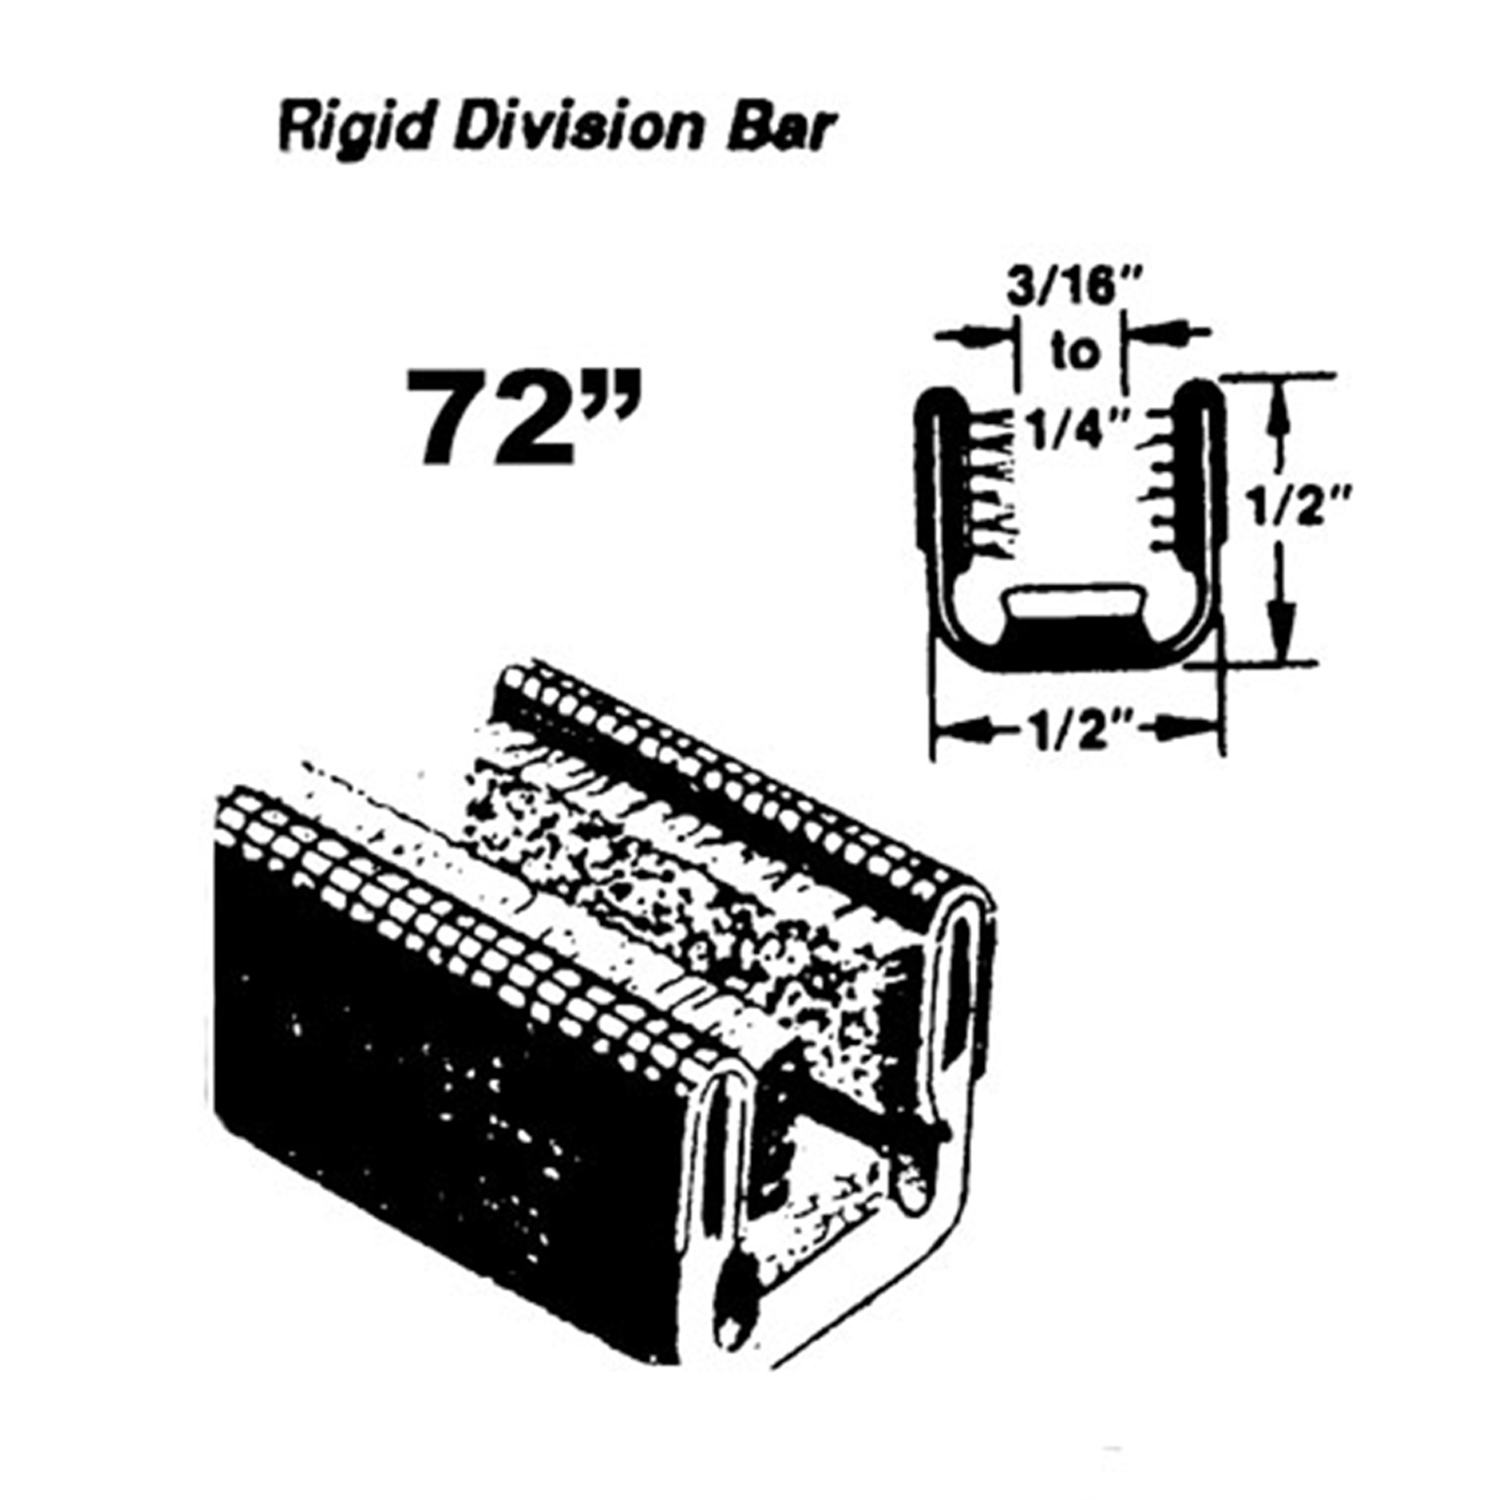 1958 GMC 150 Upper and lower rigid division-bar channel-WC 25-72